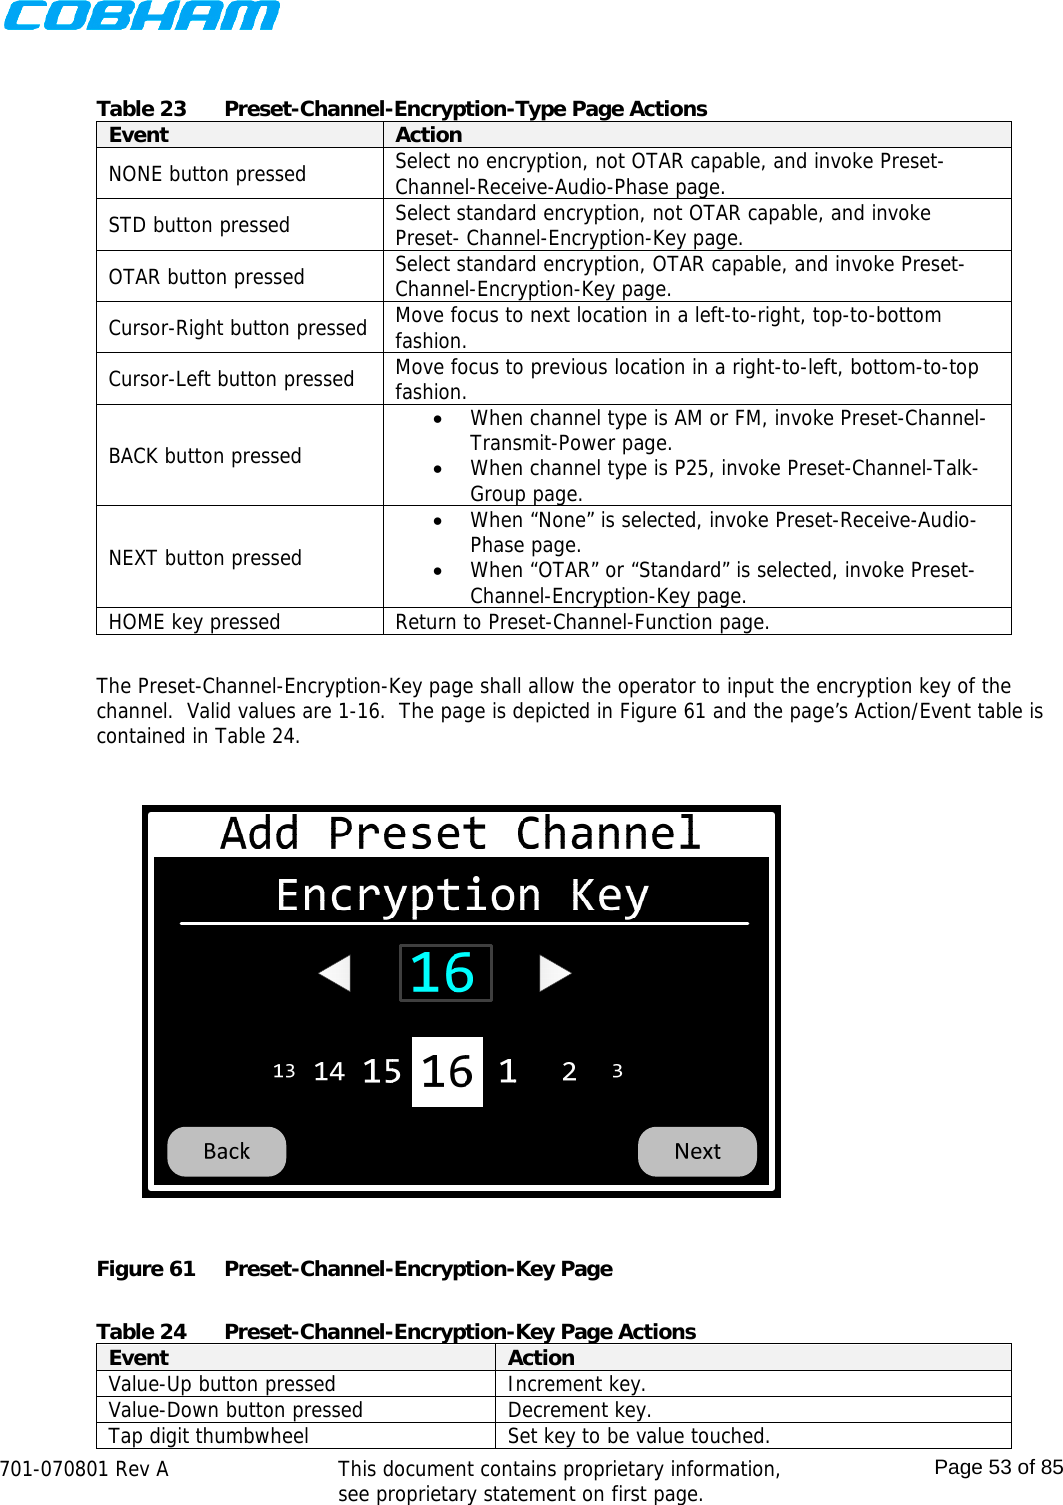    701-070801 Rev A   This document contains proprietary information, see proprietary statement on first page.  Page 53 of 85   Table 23  Preset-Channel-Encryption-Type Page Actions Event  Action NONE button pressed  Select no encryption, not OTAR capable, and invoke Preset-Channel-Receive-Audio-Phase page. STD button pressed  Select standard encryption, not OTAR capable, and invoke Preset- Channel-Encryption-Key page. OTAR button pressed  Select standard encryption, OTAR capable, and invoke Preset- Channel-Encryption-Key page. Cursor-Right button pressed  Move focus to next location in a left-to-right, top-to-bottom fashion. Cursor-Left button pressed  Move focus to previous location in a right-to-left, bottom-to-top fashion. BACK button pressed  When channel type is AM or FM, invoke Preset-Channel-Transmit-Power page.  When channel type is P25, invoke Preset-Channel-Talk-Group page. NEXT button pressed  When “None” is selected, invoke Preset-Receive-Audio-Phase page.  When “OTAR” or “Standard” is selected, invoke Preset-Channel-Encryption-Key page. HOME key pressed  Return to Preset-Channel-Function page.  The Preset-Channel-Encryption-Key page shall allow the operator to input the encryption key of the channel.  Valid values are 1-16.  The page is depicted in Figure 61 and the page’s Action/Event table is contained in Table 24.  Figure 61  Preset-Channel-Encryption-Key Page  Table 24  Preset-Channel-Encryption-Key Page Actions Event  Action Value-Up button pressed  Increment key. Value-Down button pressed  Decrement key. Tap digit thumbwheel  Set key to be value touched. 